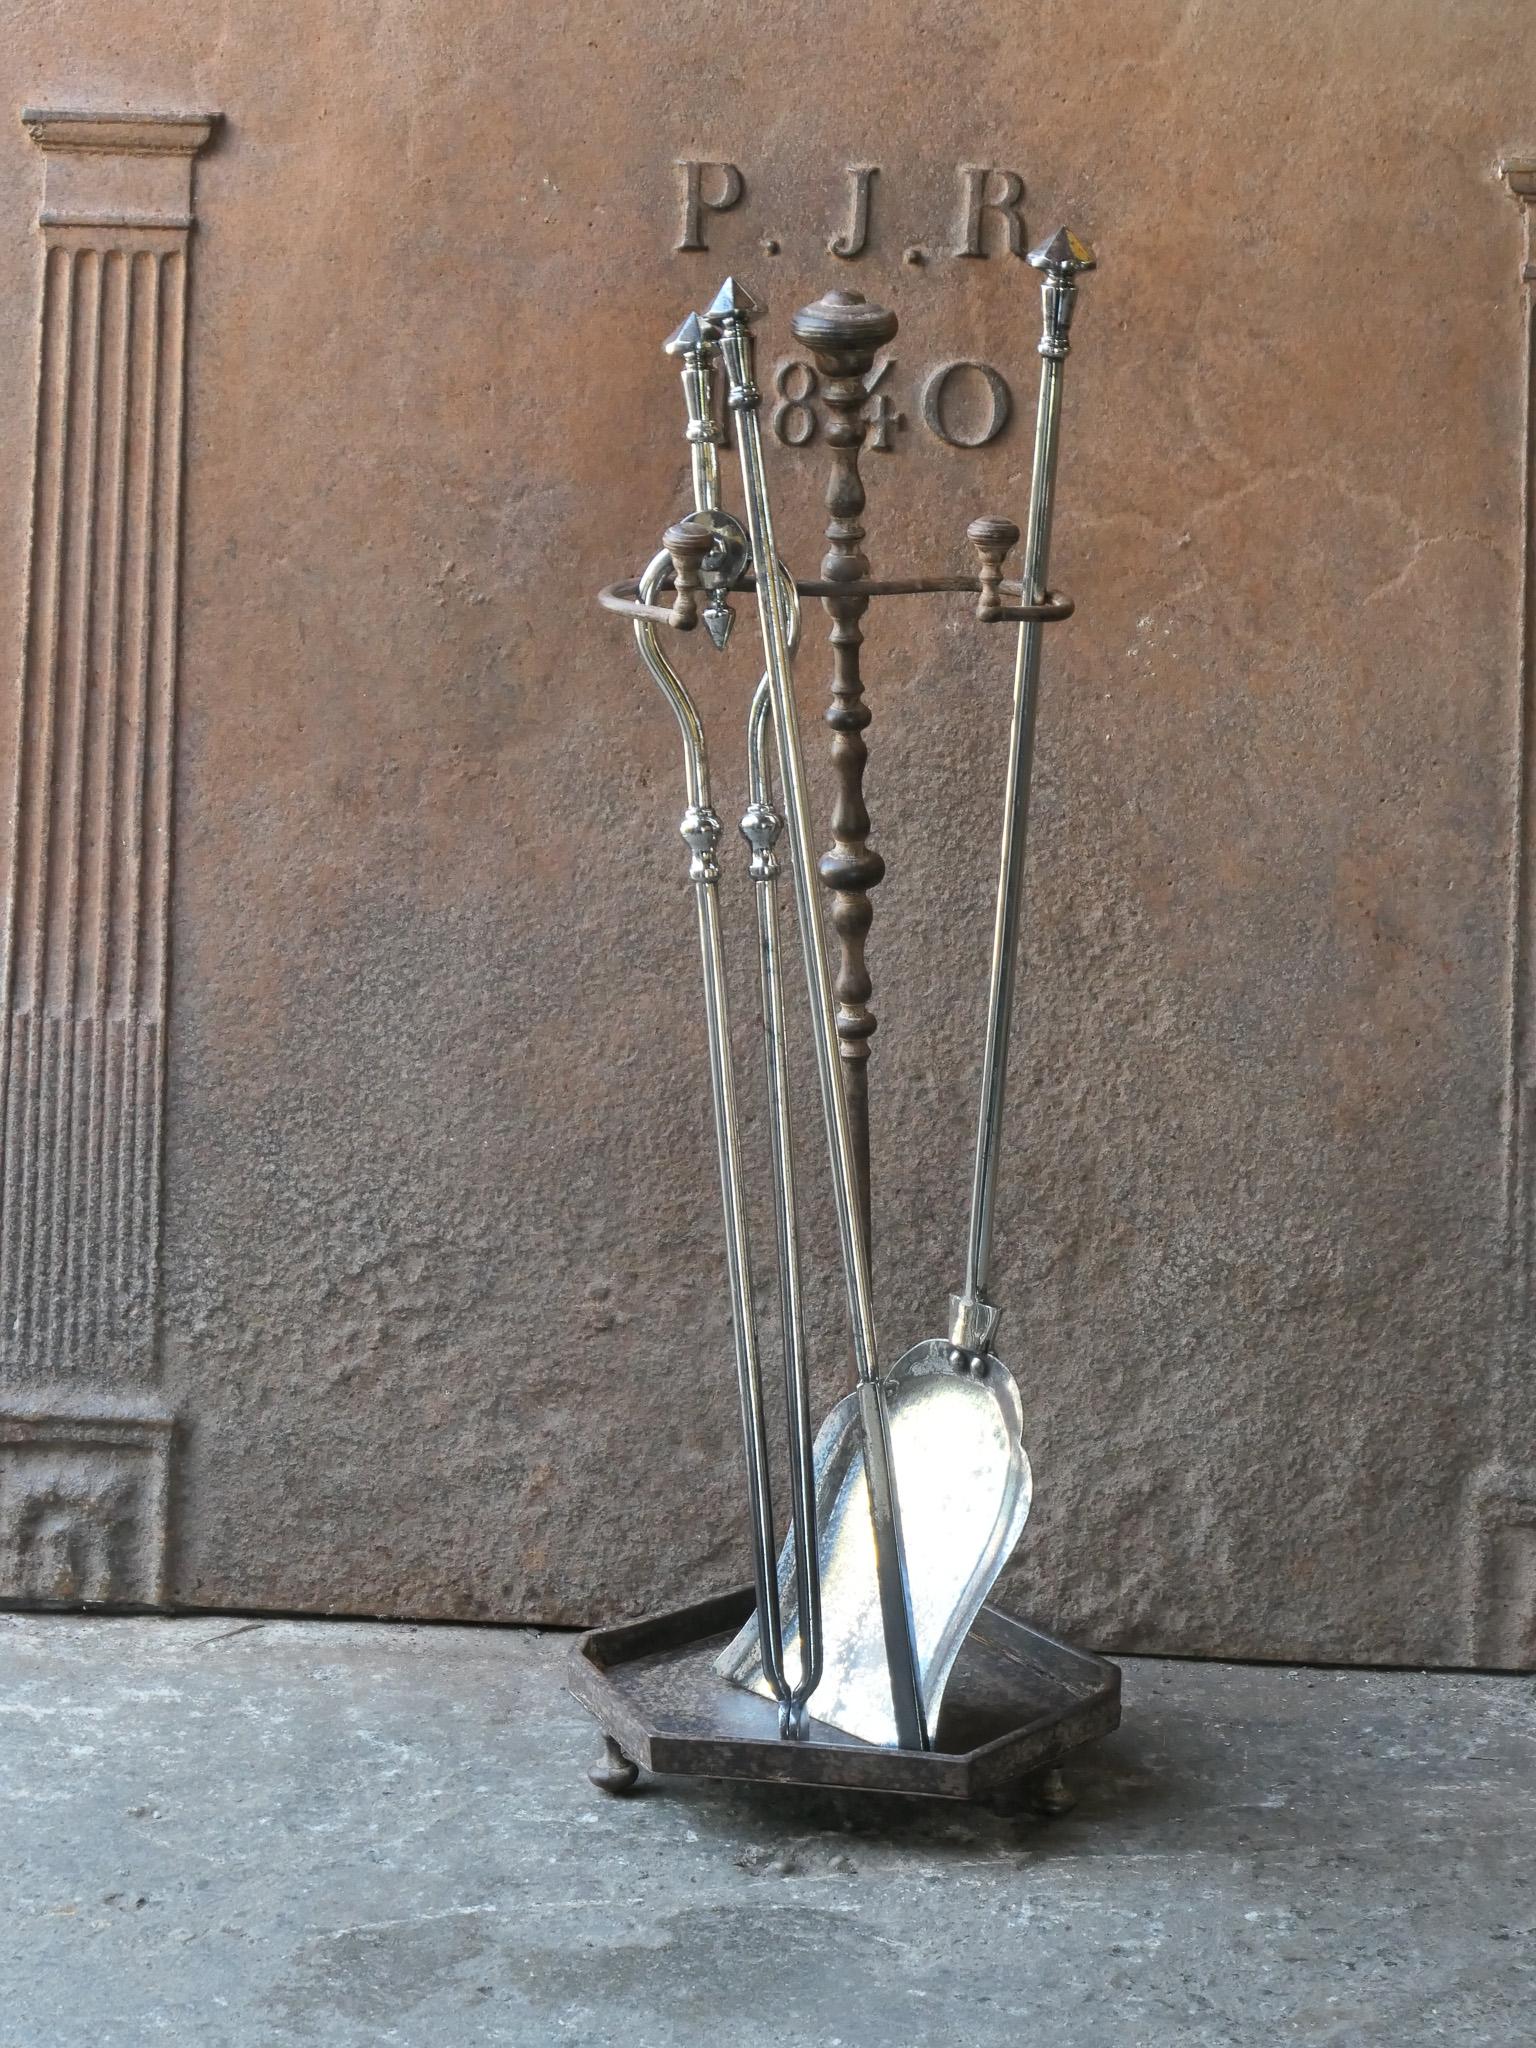 19th century English Victorian period fireplace toolset. The tools are made of polished steel, while the stand is made of wrought and cast iron. The toolset consists of tongs, poker, shovel and stand. The condition is good.








.